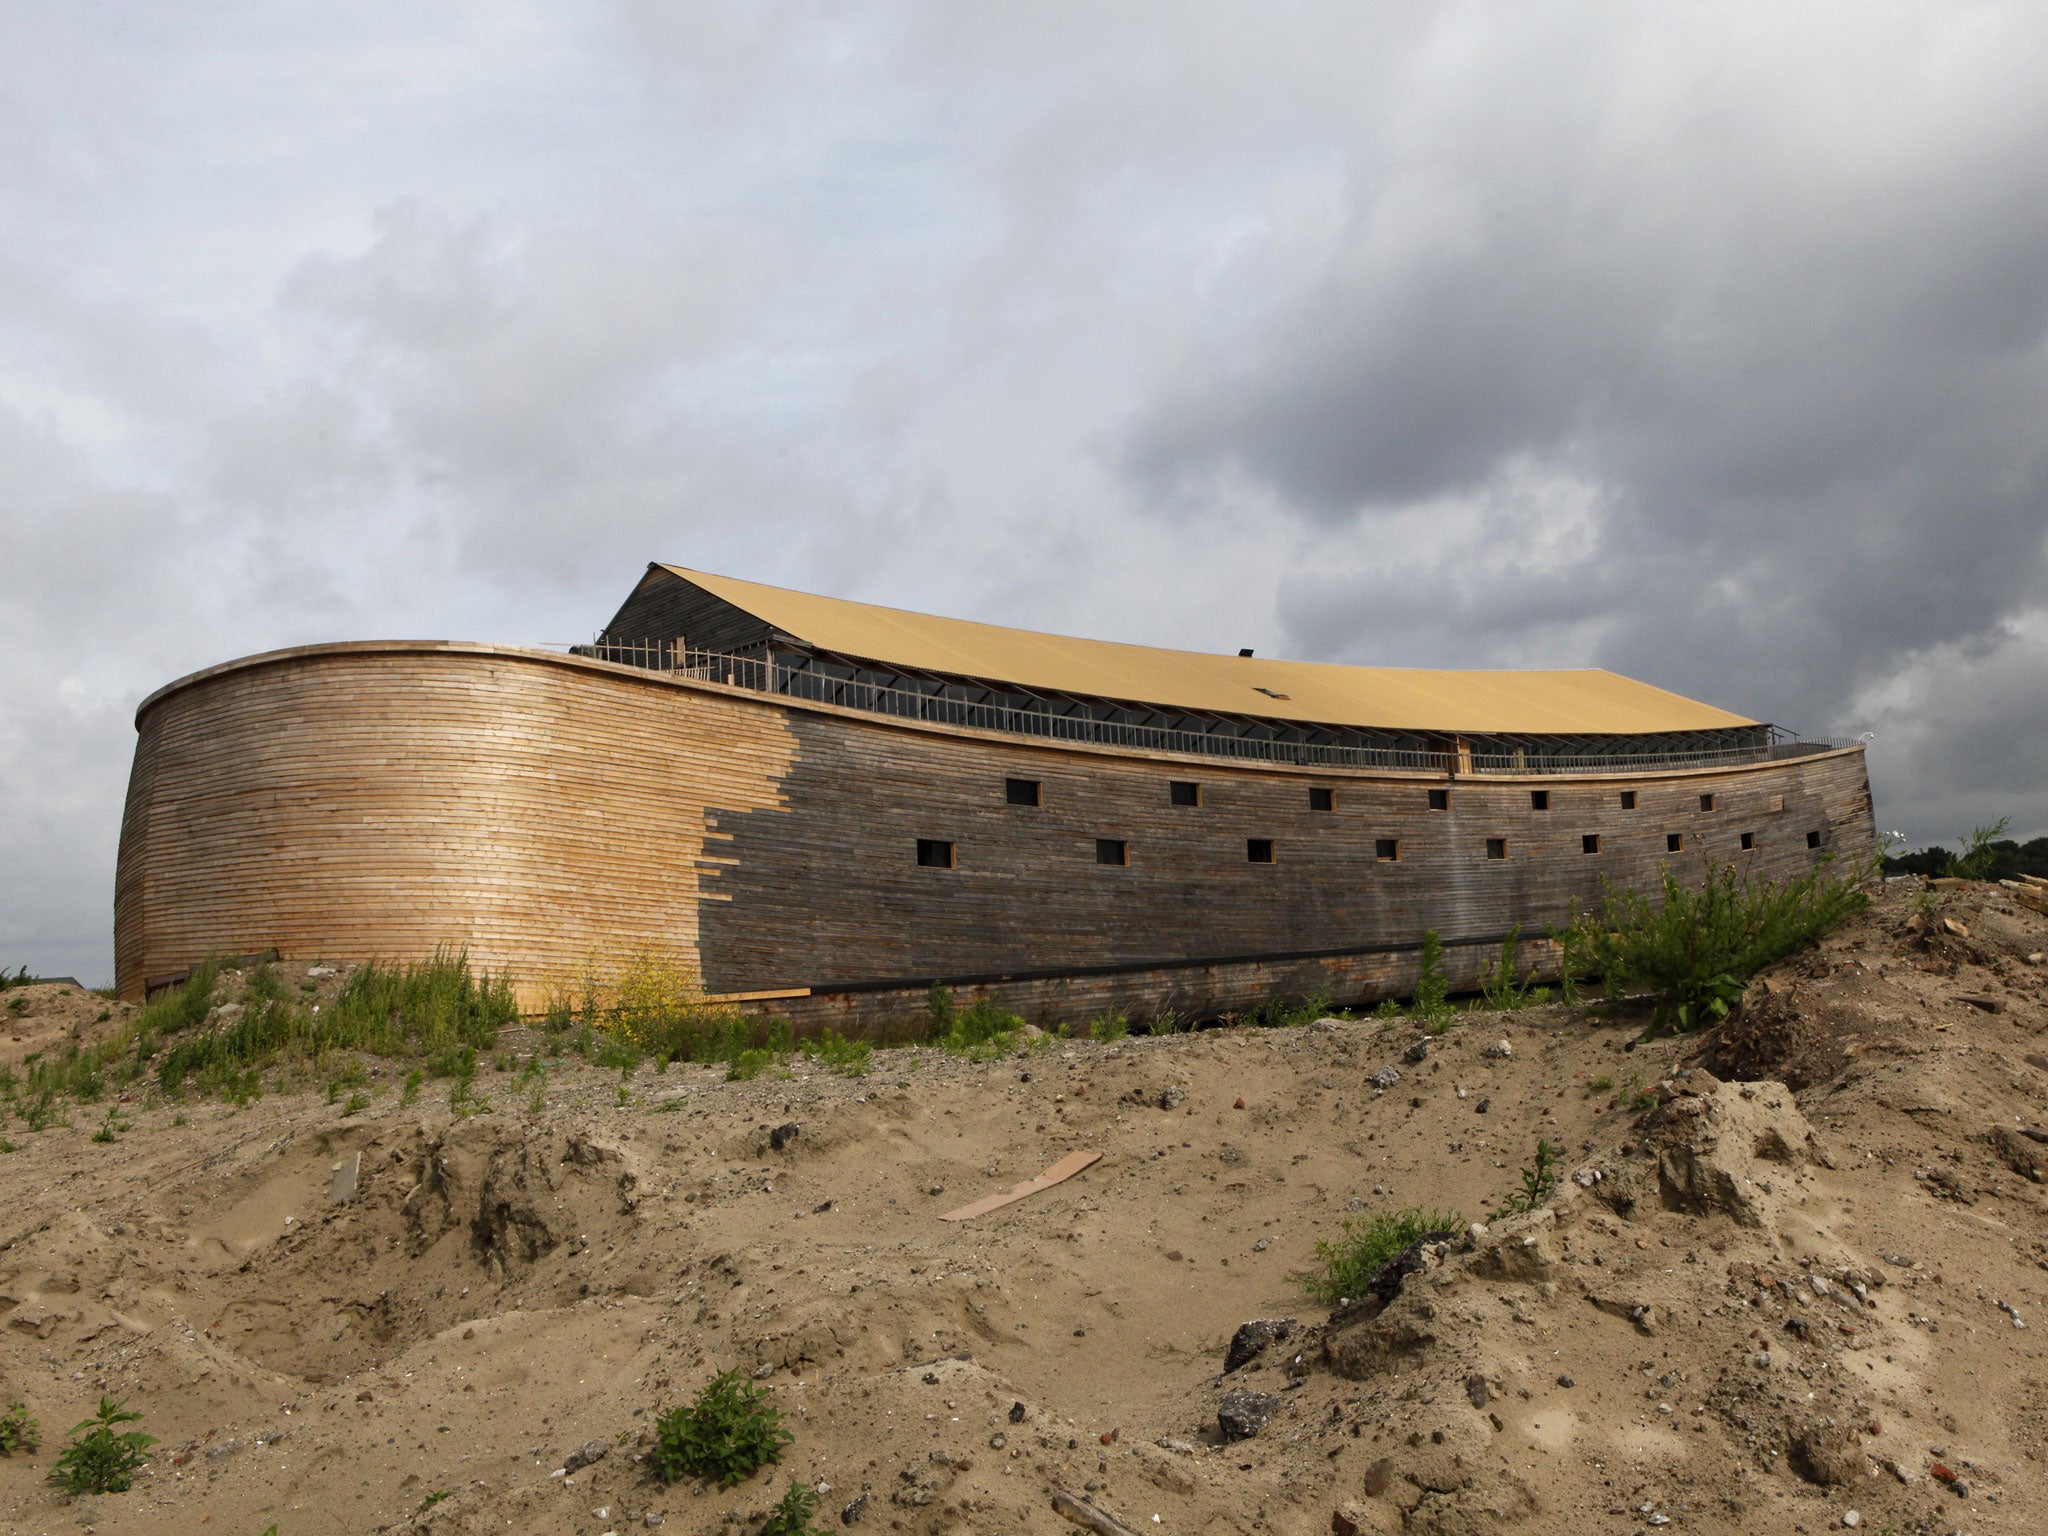 An actual life-sized, 150-metre-long ark, built at an abandoned quay in the Netherlands (Getty Images, 2011)